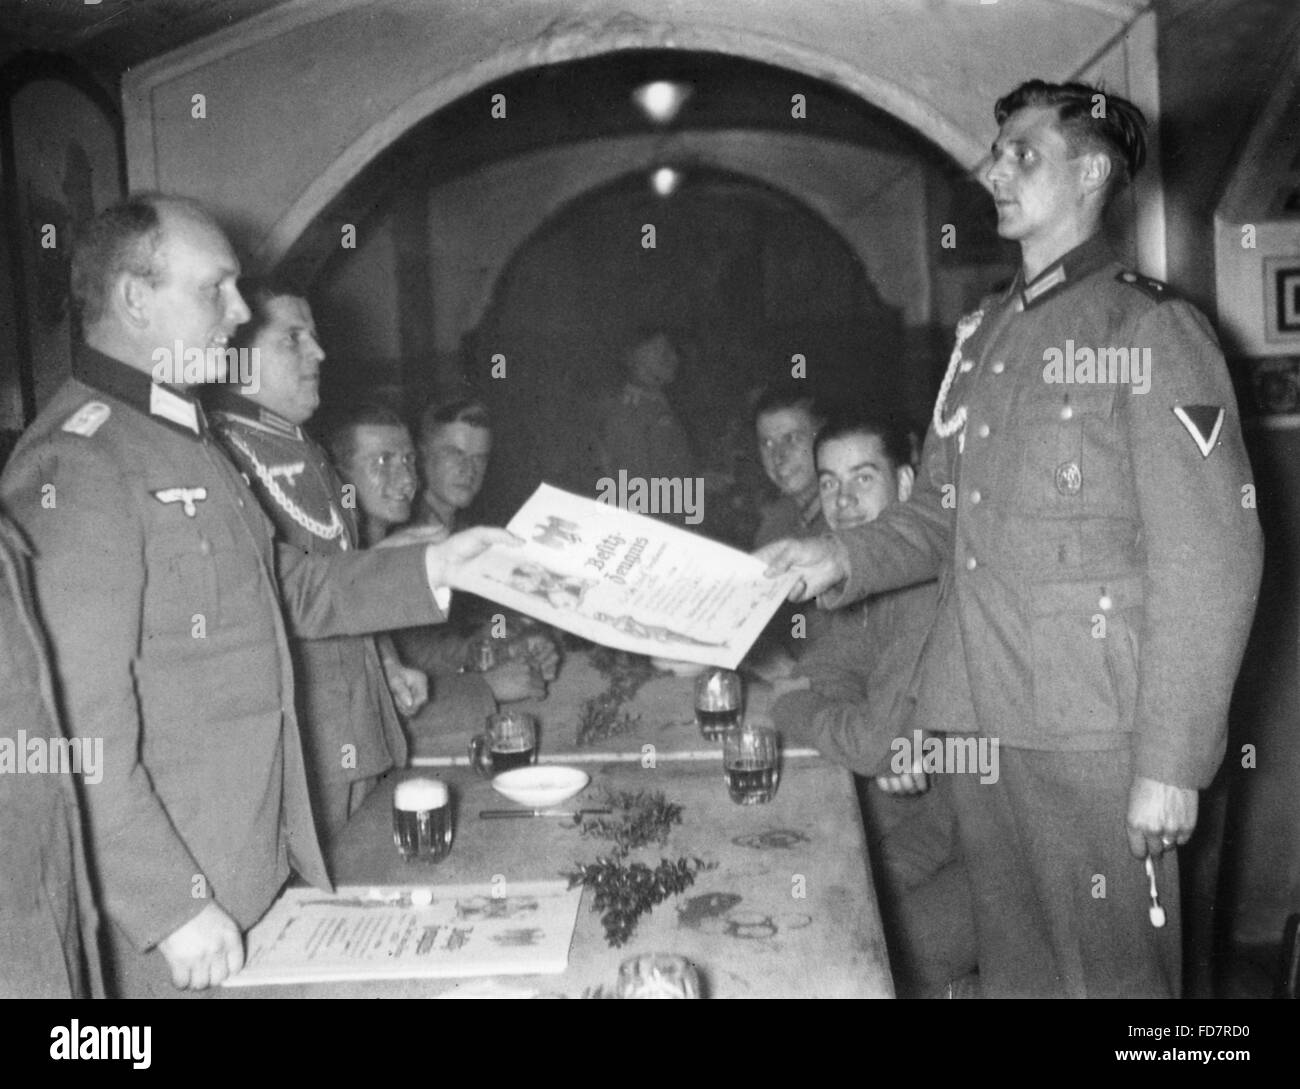 Social evening at the 9th Infantry Regiment in Potsdam, 1938 Stock Photo